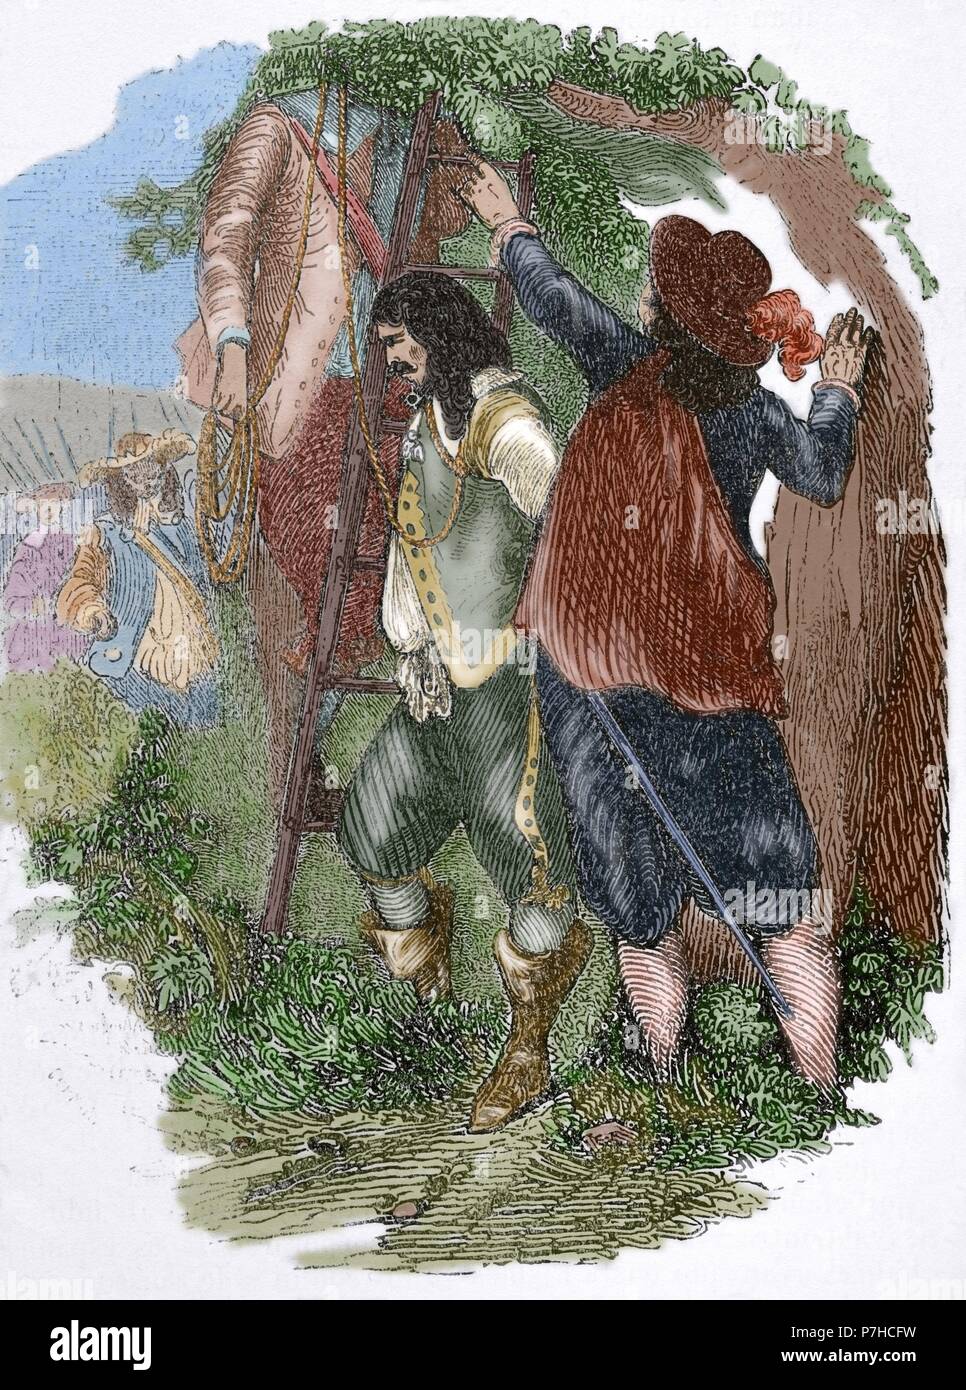 Armand-Charles de La Porte, Duc de La Meilleraye (1632-1713). French general, Grand Master and Captain General of Artillery. La Meilleraye orders the the envoy from Bordeaux to be hanged. Engraving. 19th century. Colored. Stock Photo